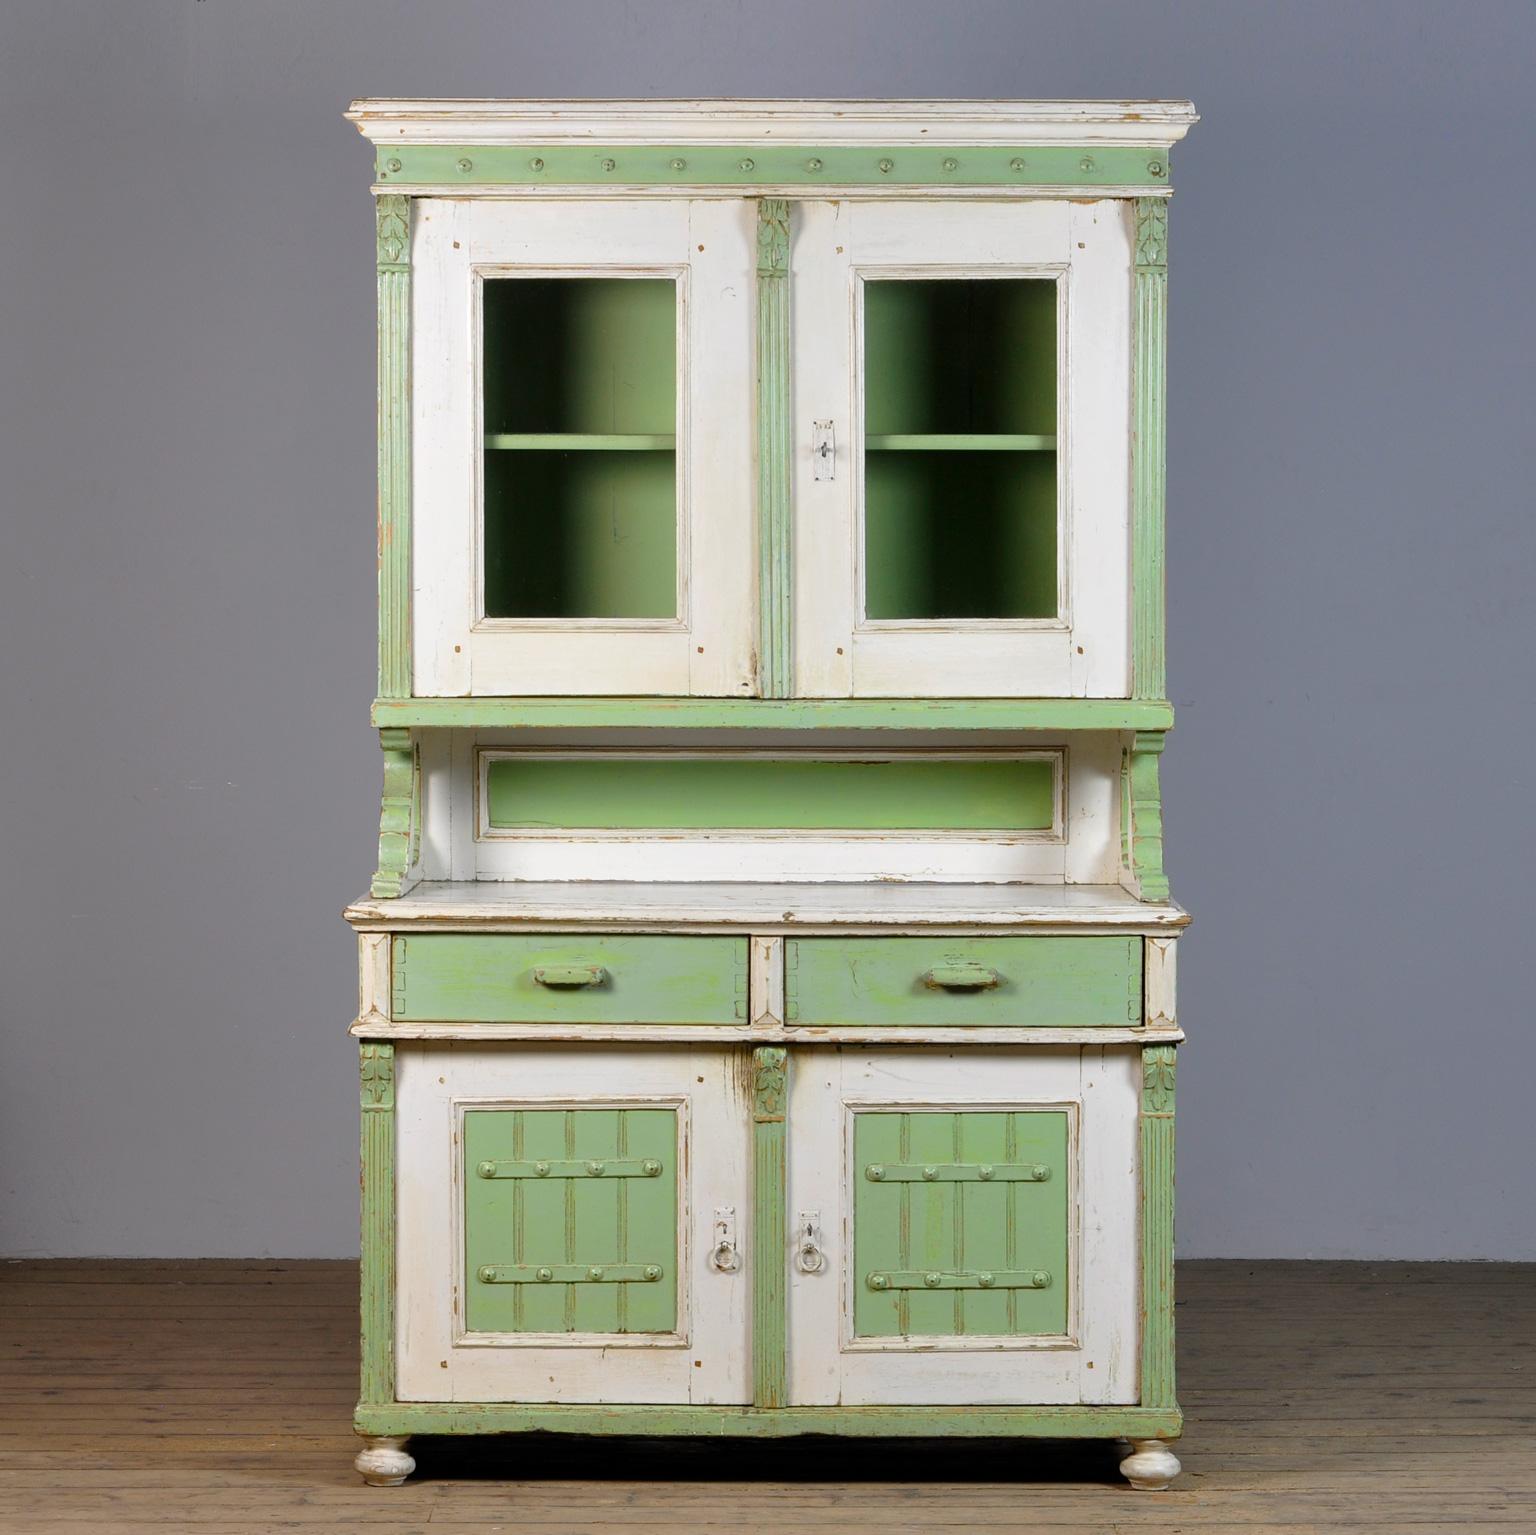 Large pine cupboard from the 1920s. The cabinet consists of 2 separate parts. In the upper part 2 doors with one shelf. At the bottom 2 drawers above and 2 doors with a shelf for plenty of storage space. Original paint.